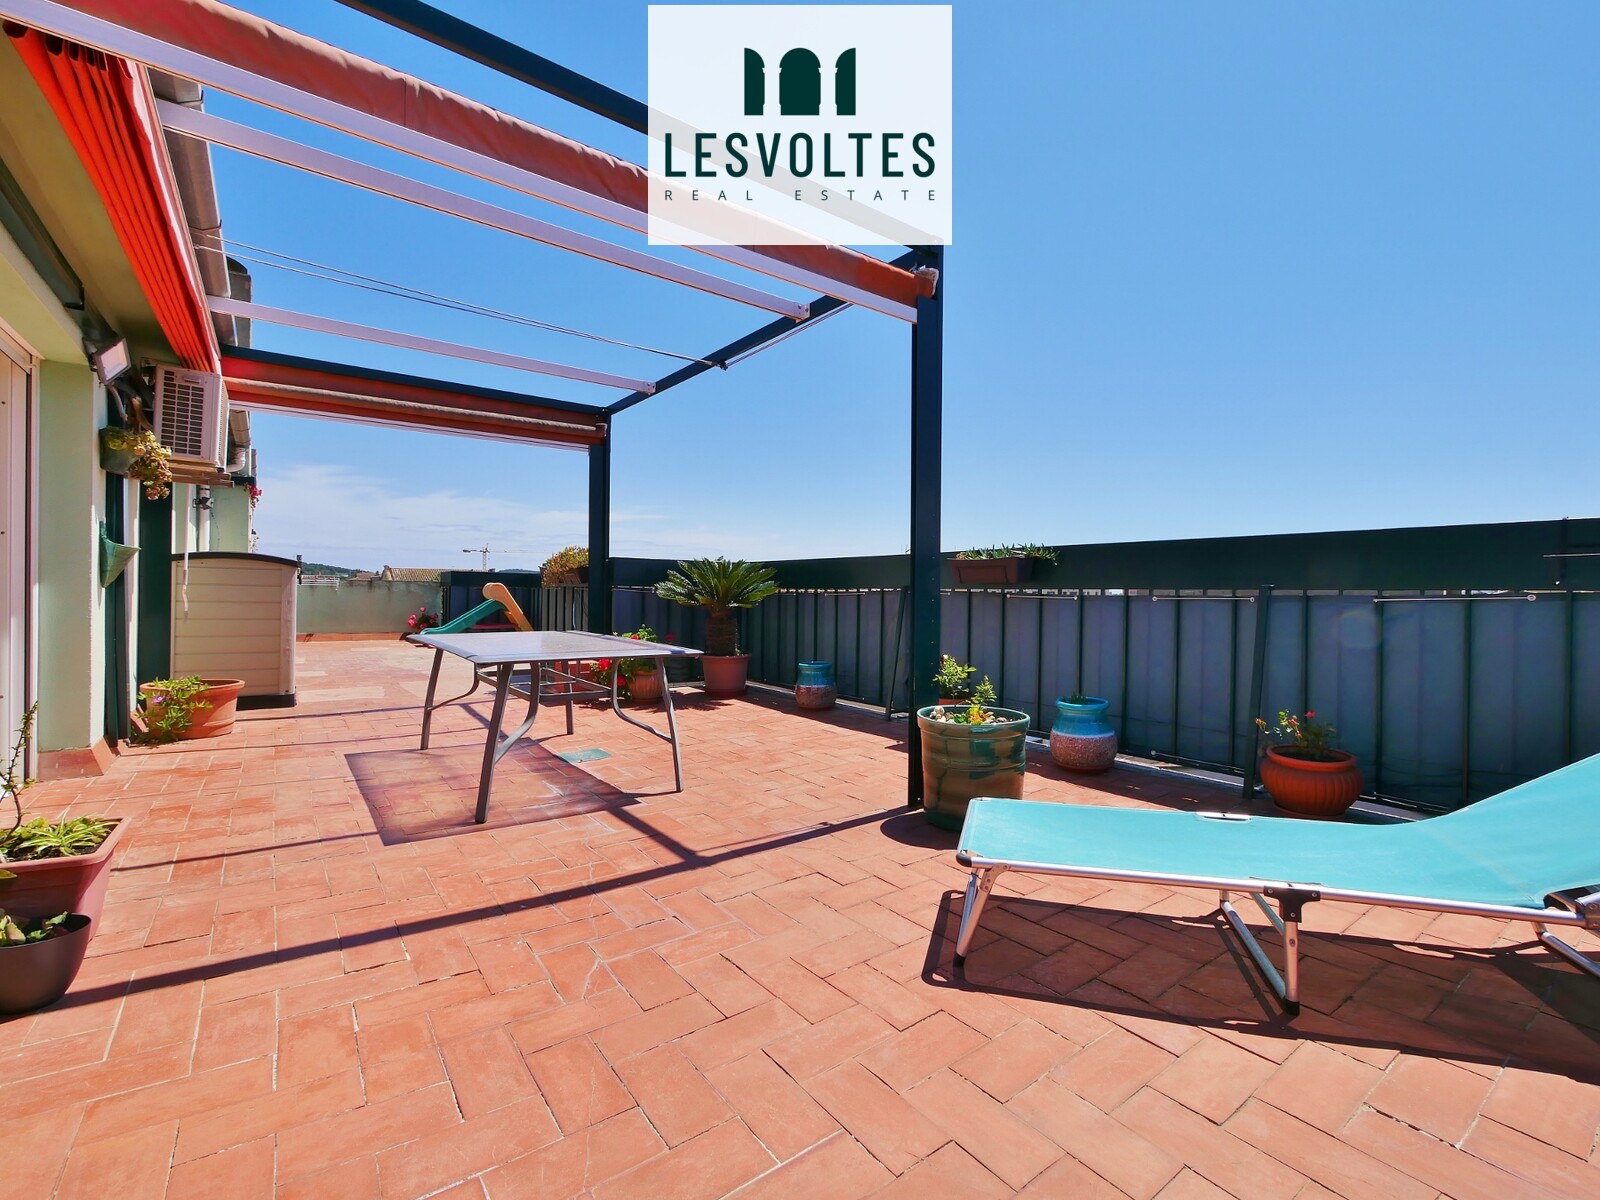 3 BEDROOM PENTHOUSE WITH MAGNIFICENT TERRACE OF 60 M2 IN PALAFRUGELL